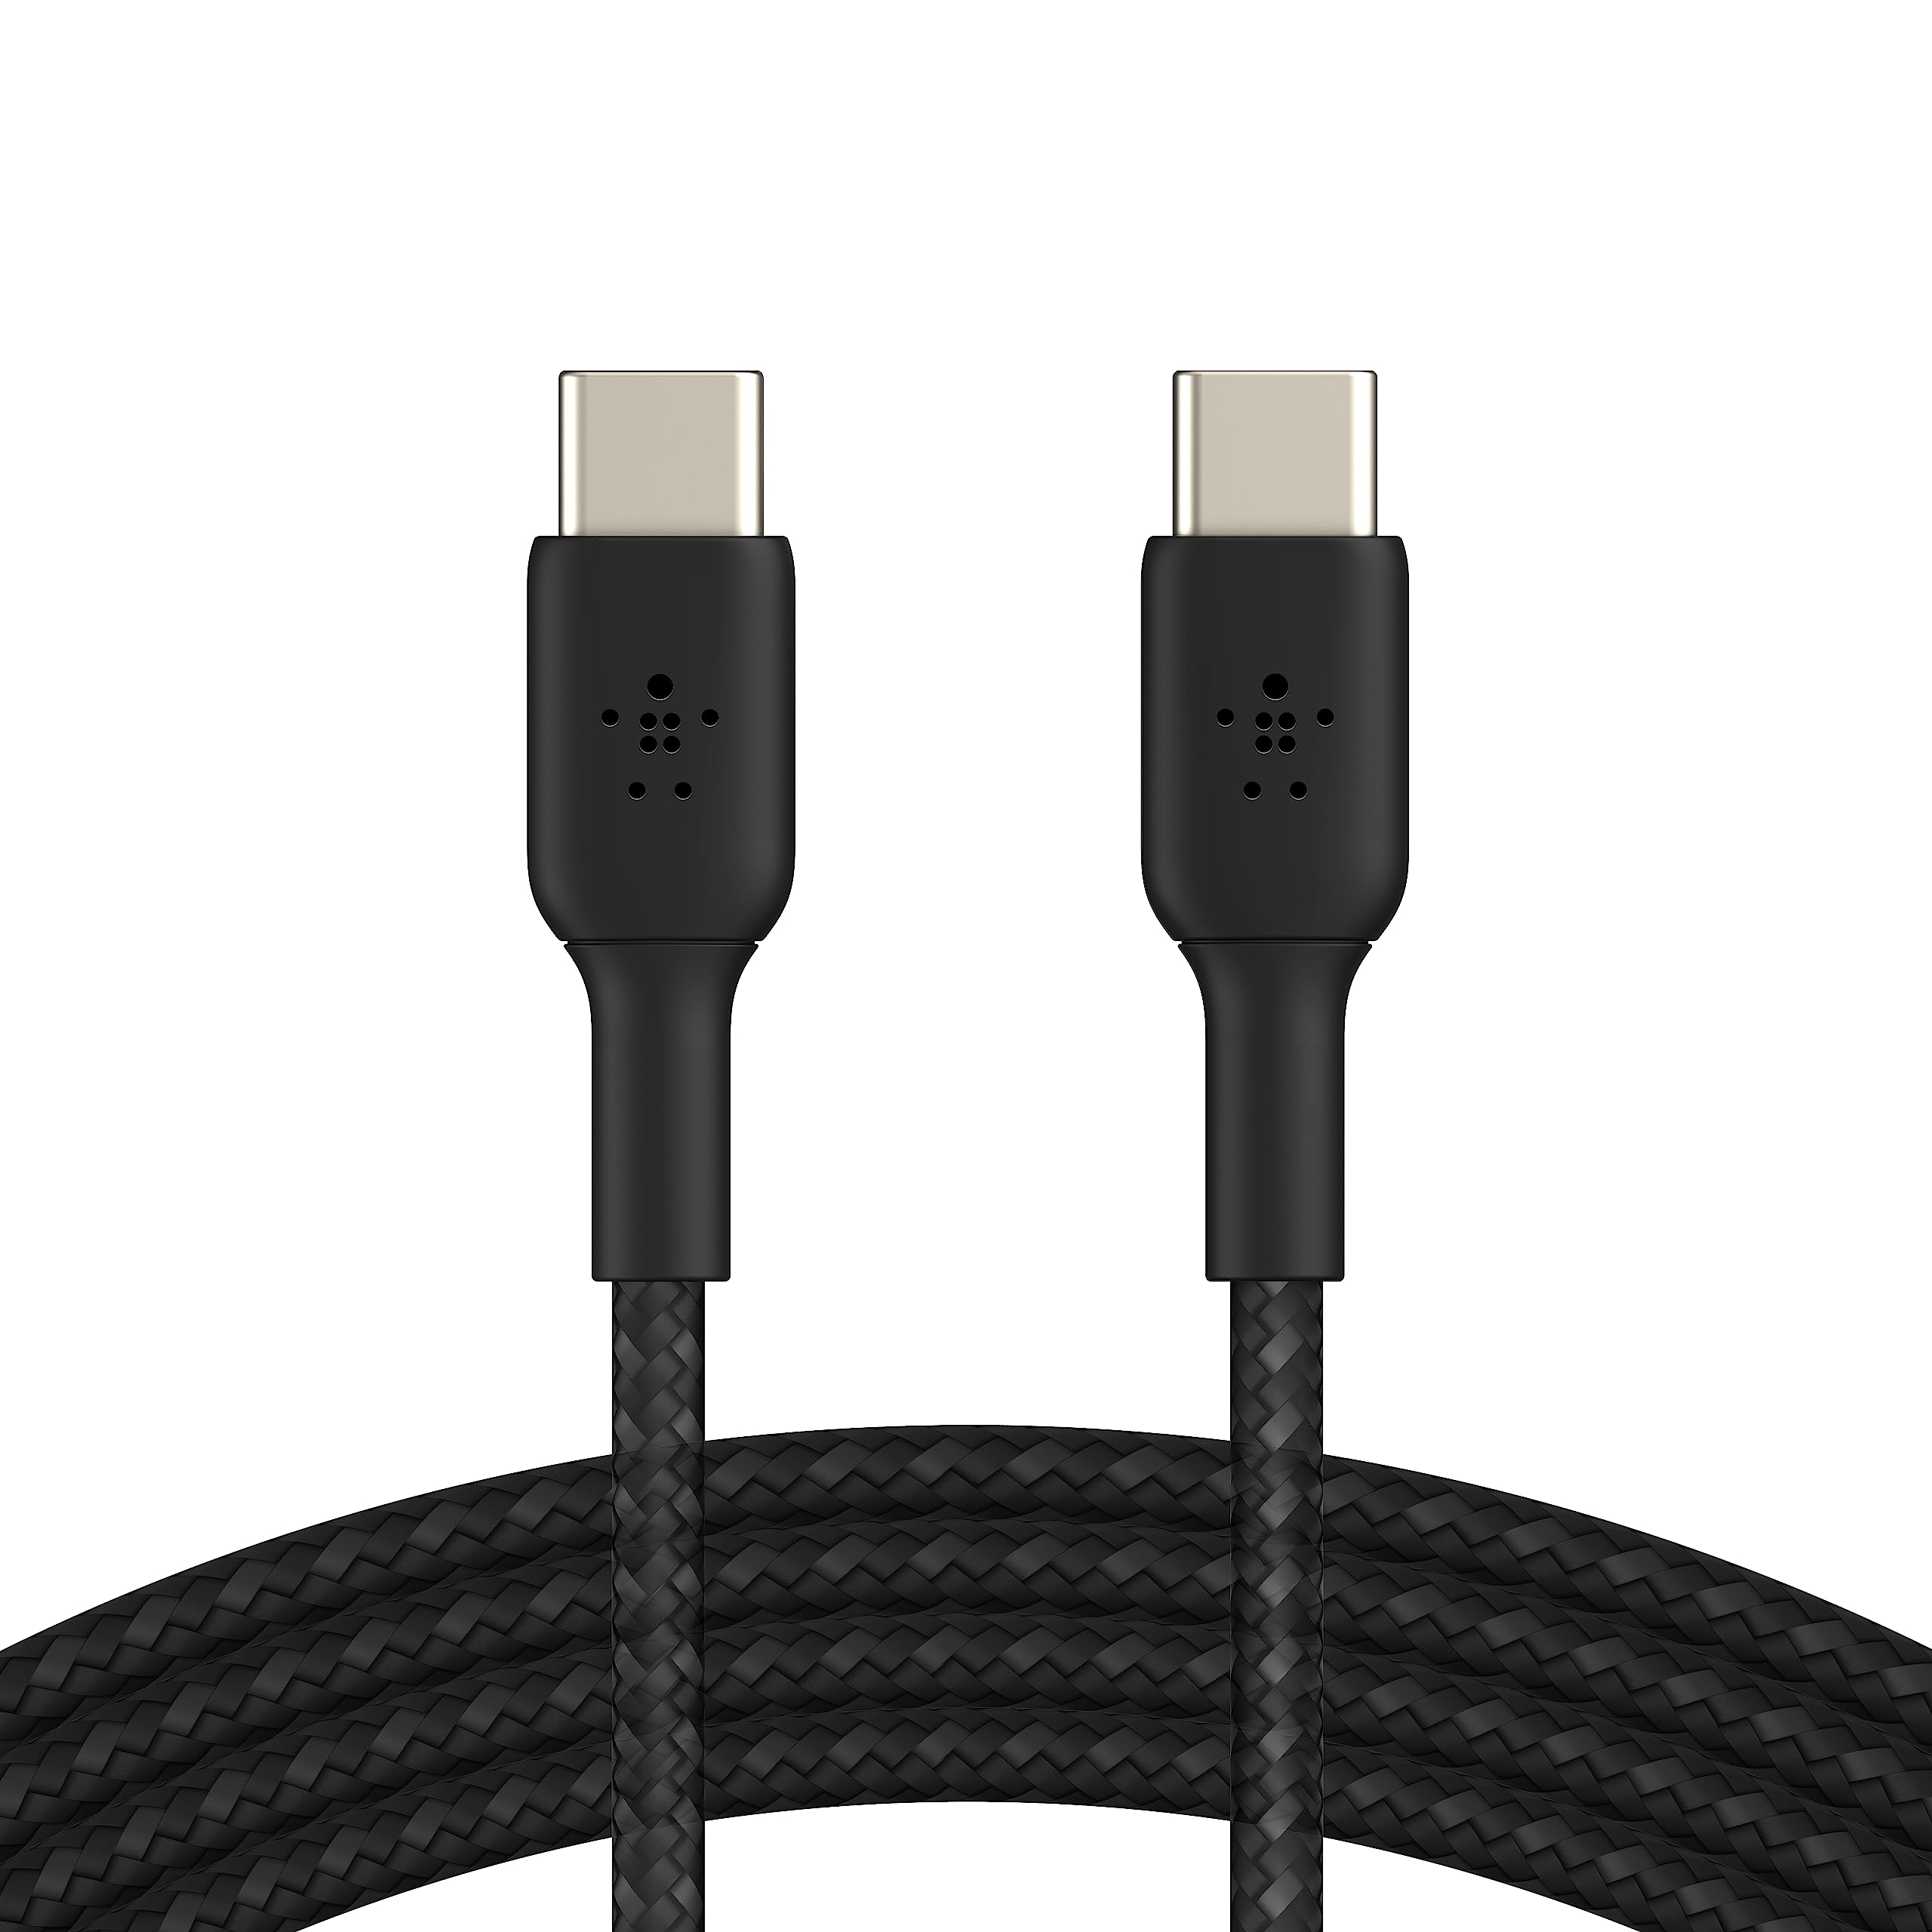 Belkin BoostCharge Braided USB-C to USB-C Cable (2M/6.6ft) for iPhone 15, iPhone 15 Pro, iPhone 15 Pro Max, iPhone 15 Plus, Galaxy S23, S22, Note10, Note9, Pixel 7, Pixel 6, iPad Pro, & More - Black